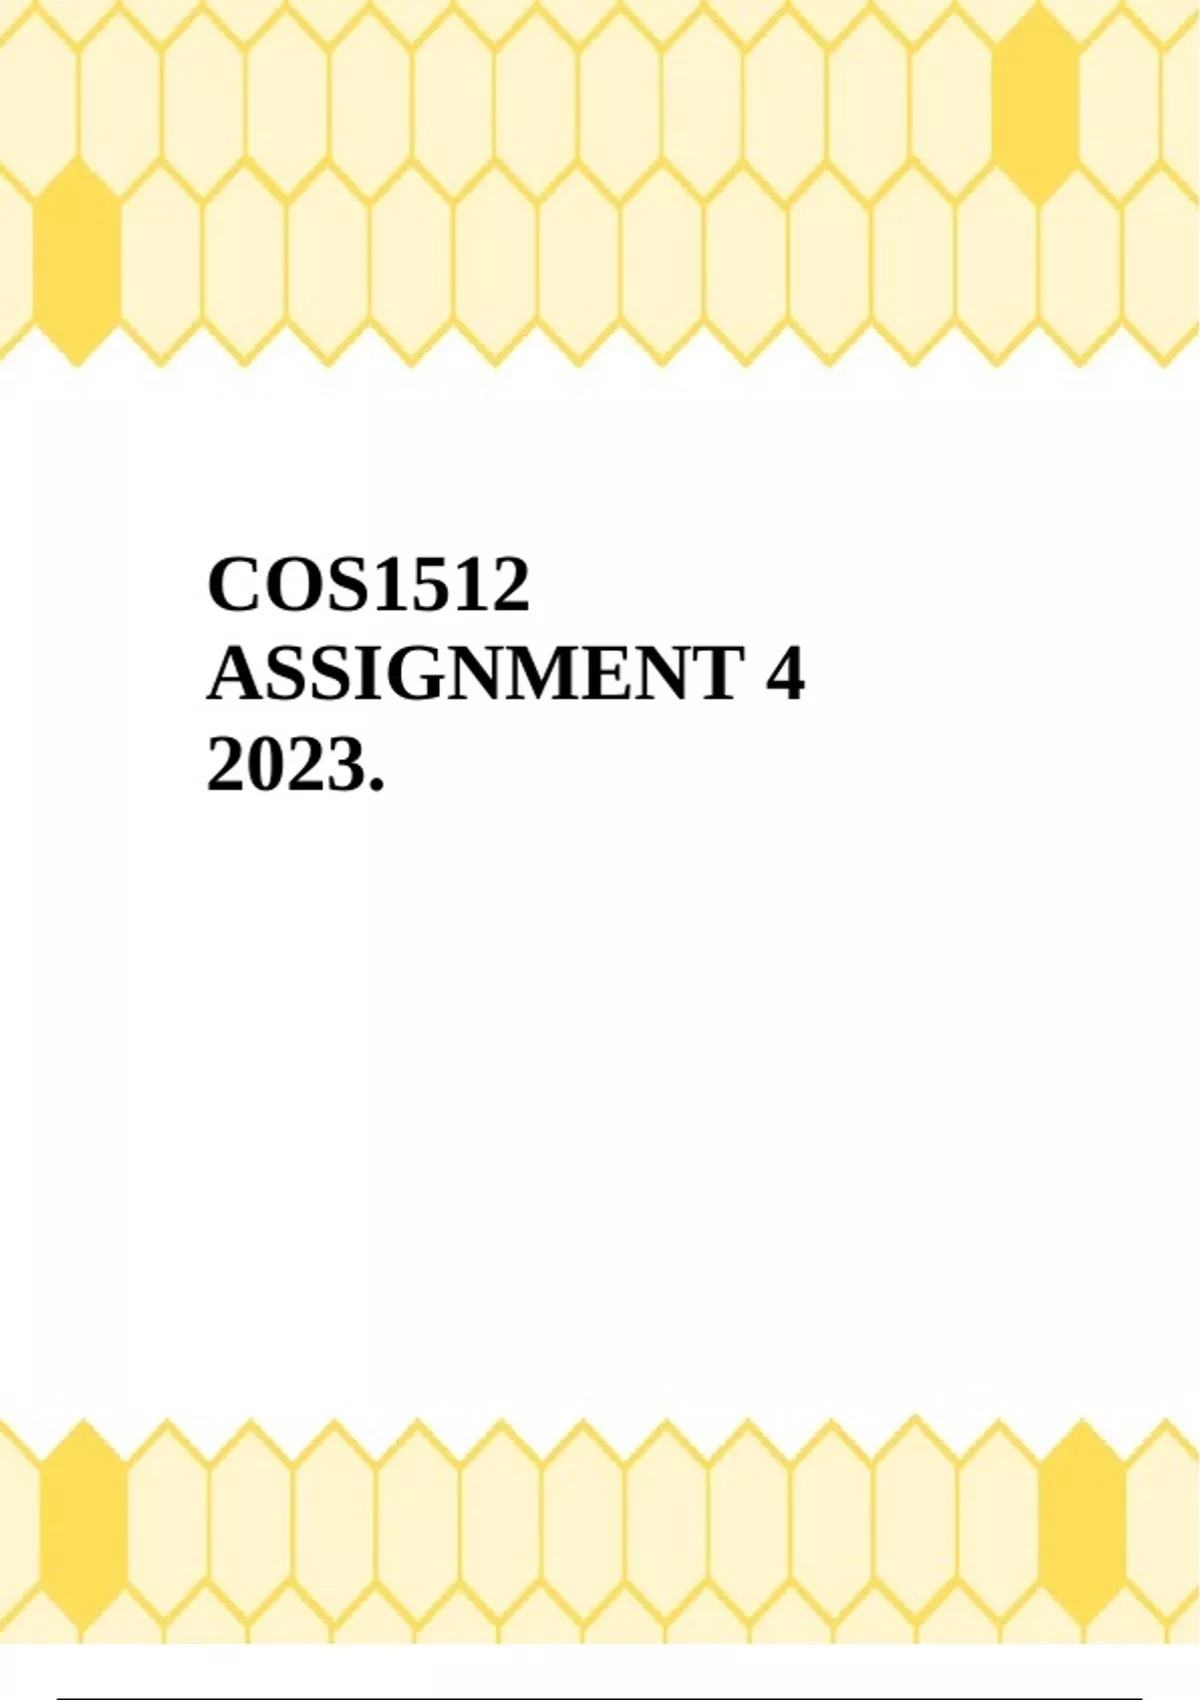 cos1512 assignment 3 solutions 2021